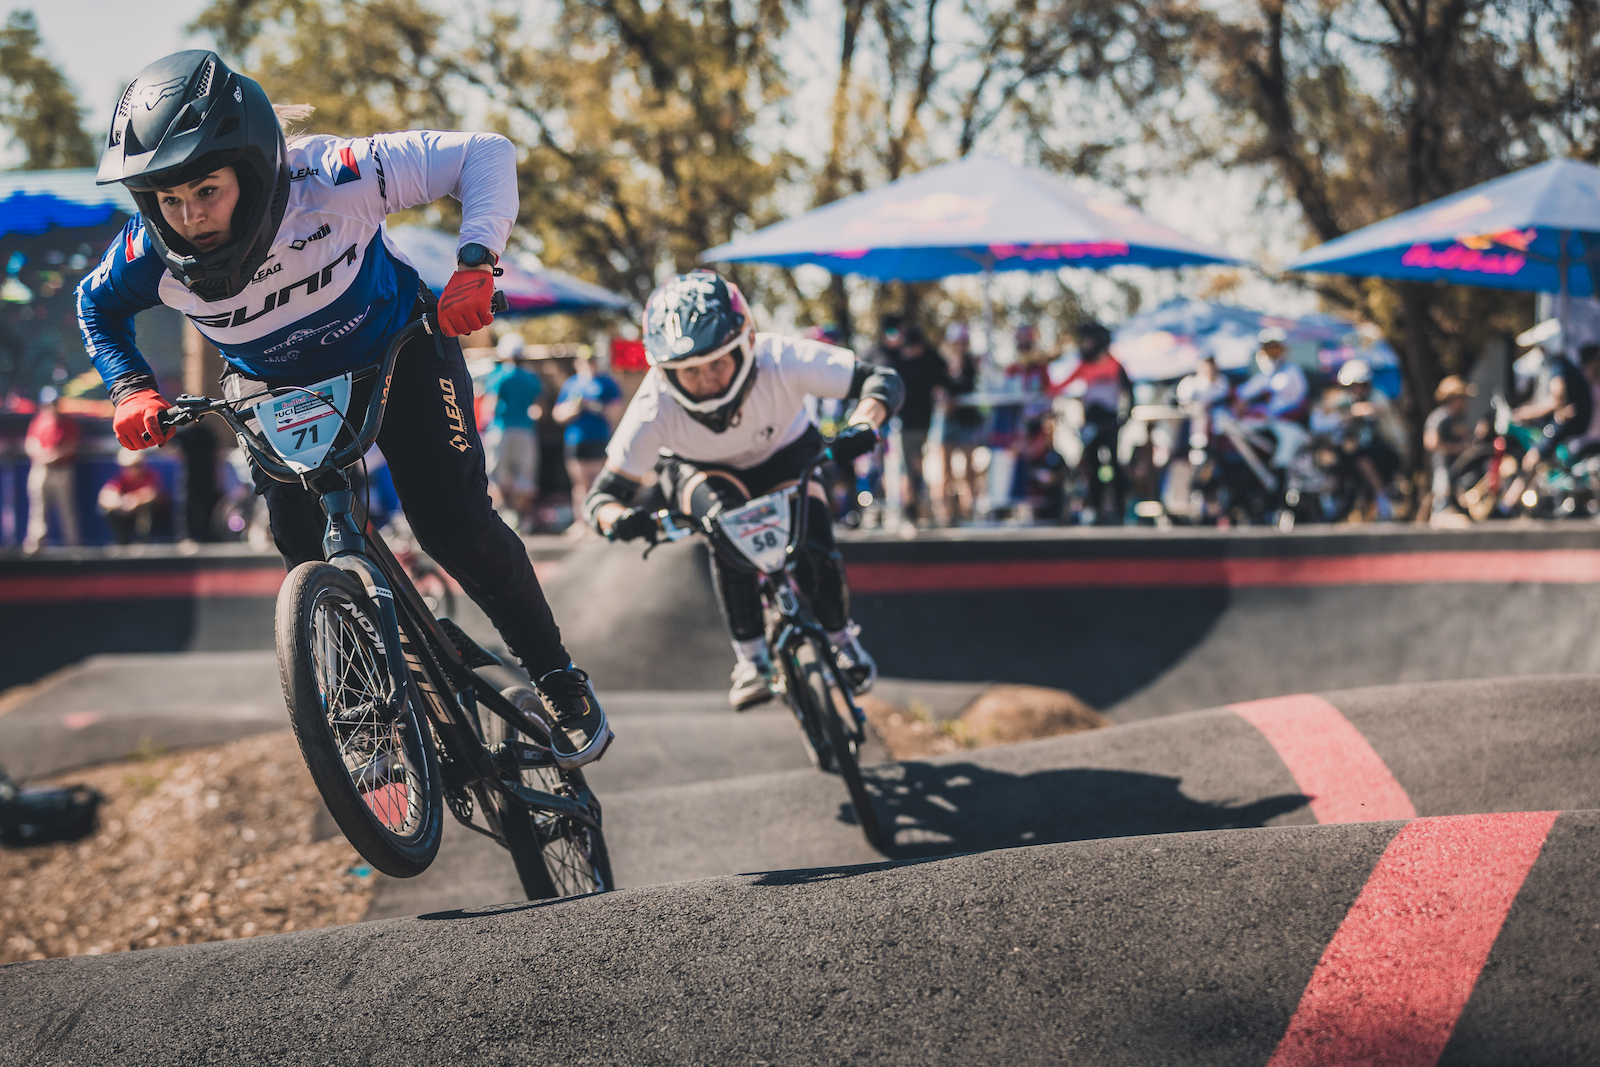 Relationships between riders on the pump track series are positive.